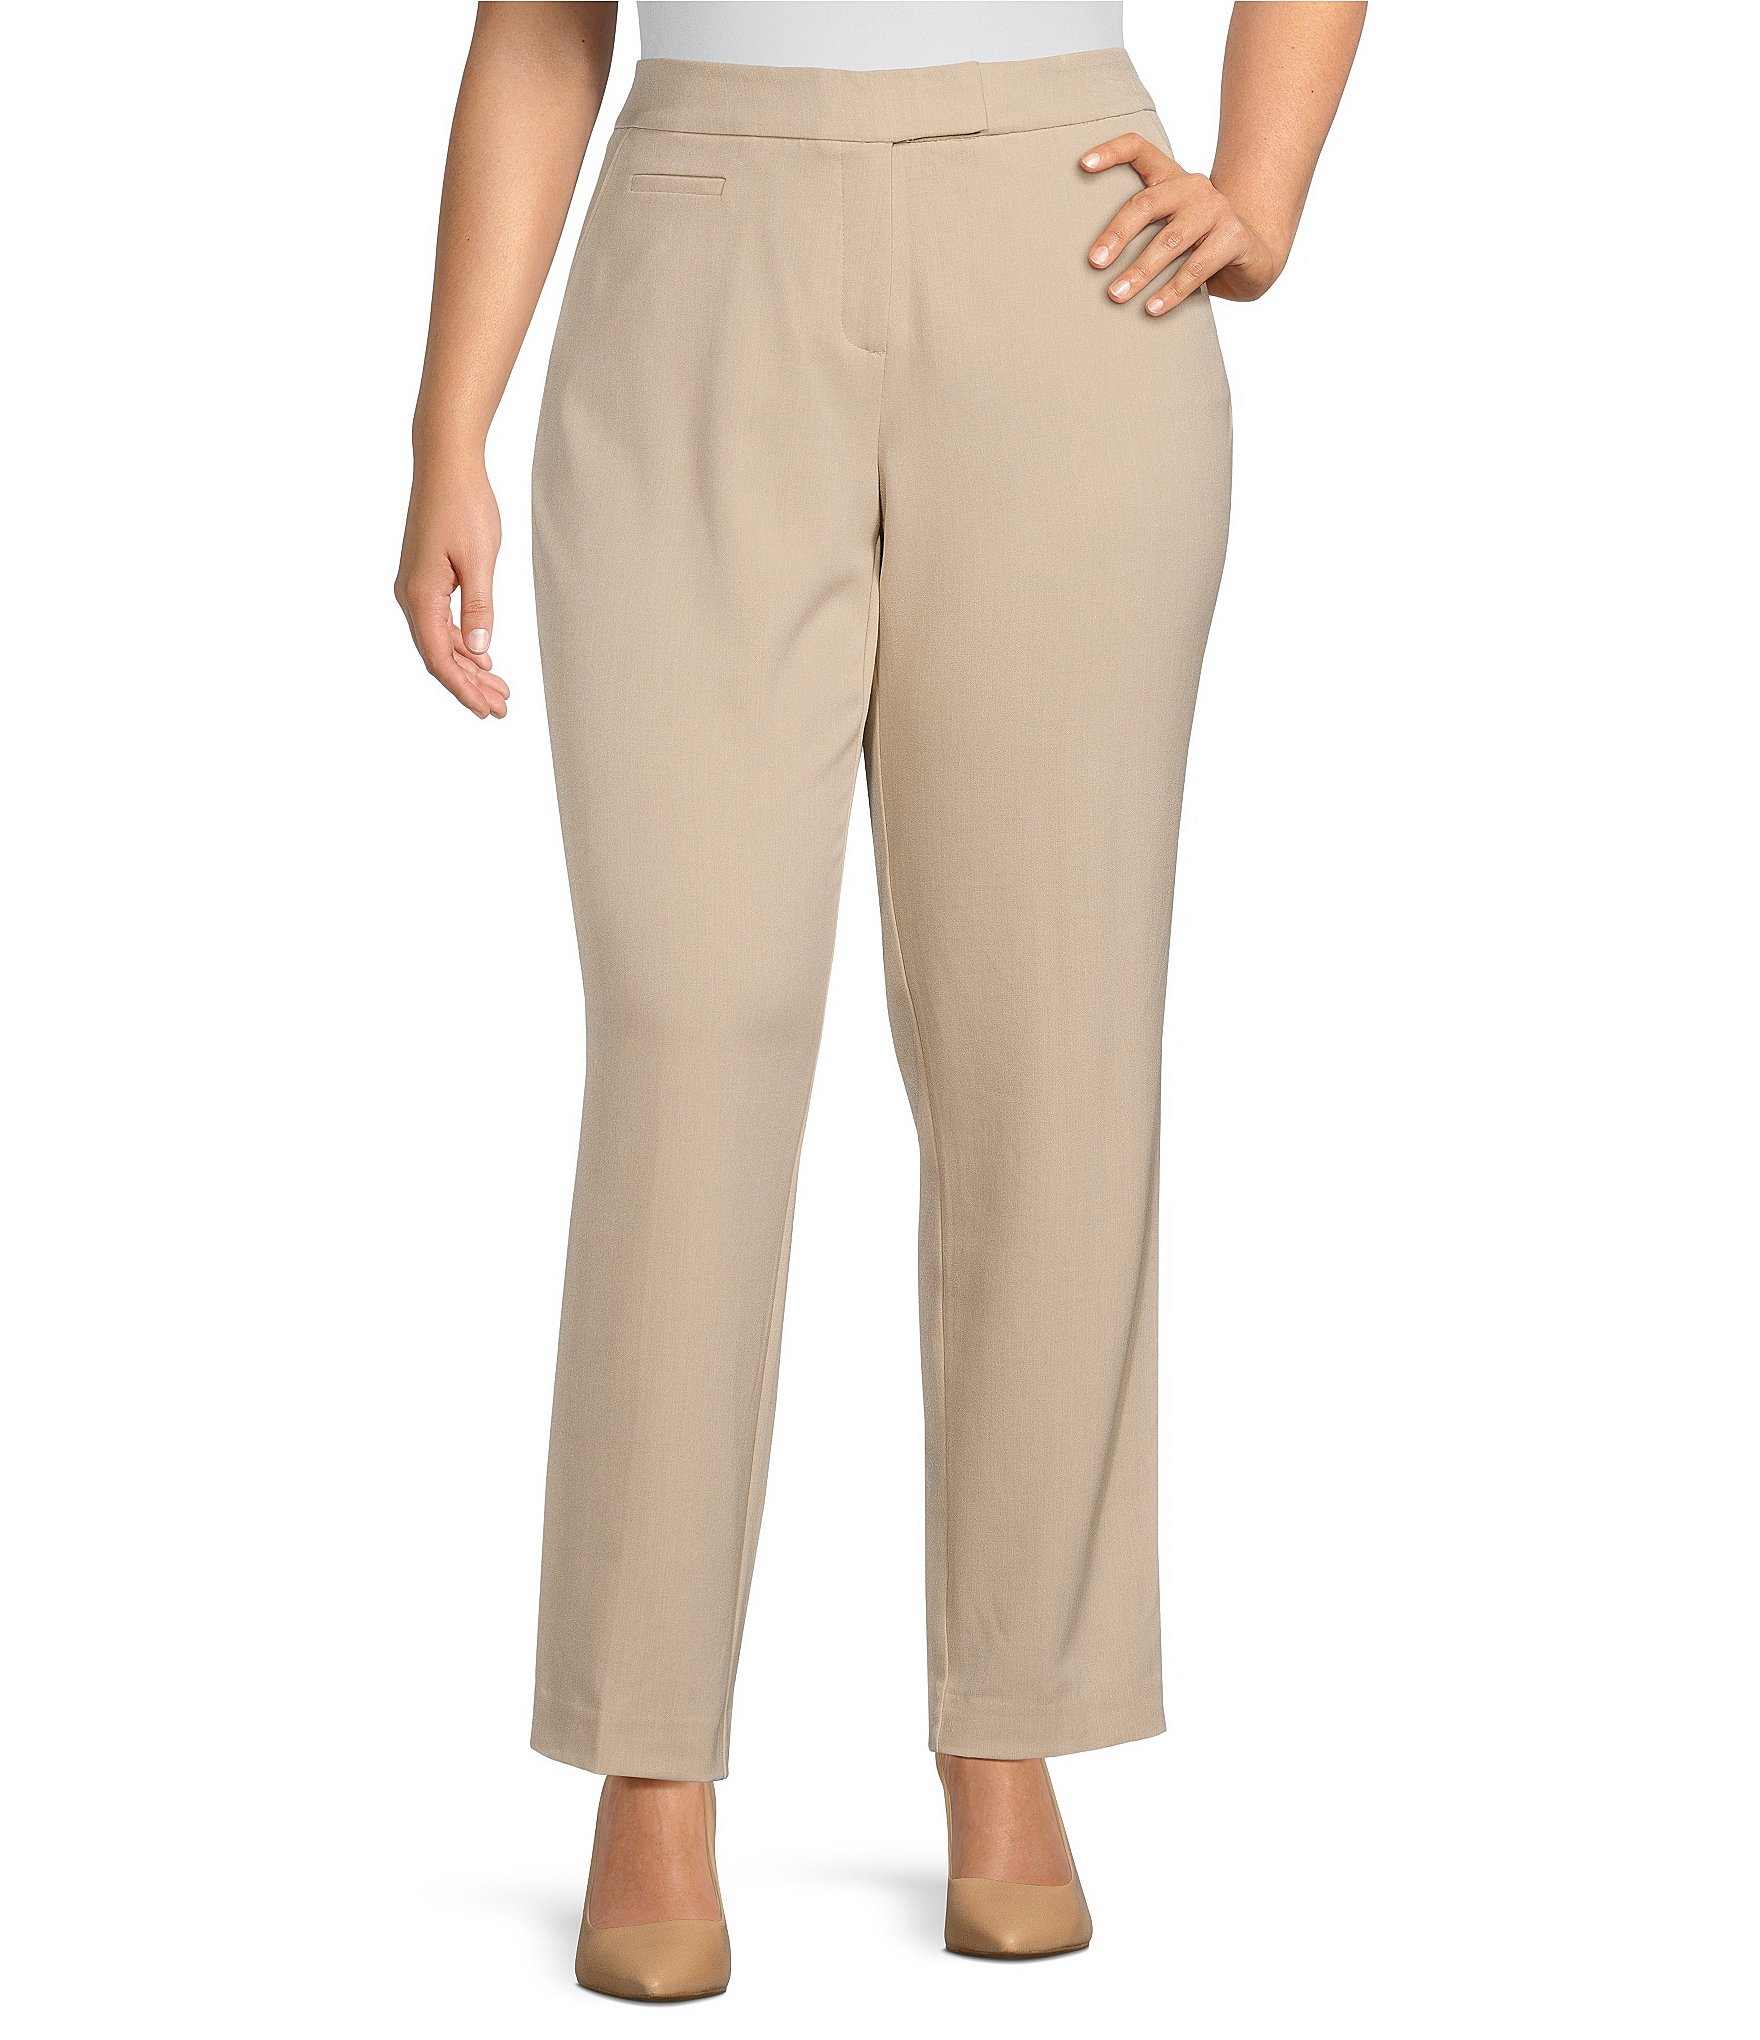 https://dimg.dillards.com/is/image/DillardsZoom/zoom/investments-plus-size-the-5th-ave-fit-heathered-humus-tummy-control-straight-leg-pants/00000001_zi_23152bb1-af7e-4bd4-a768-c241c5cce2f3.jpg